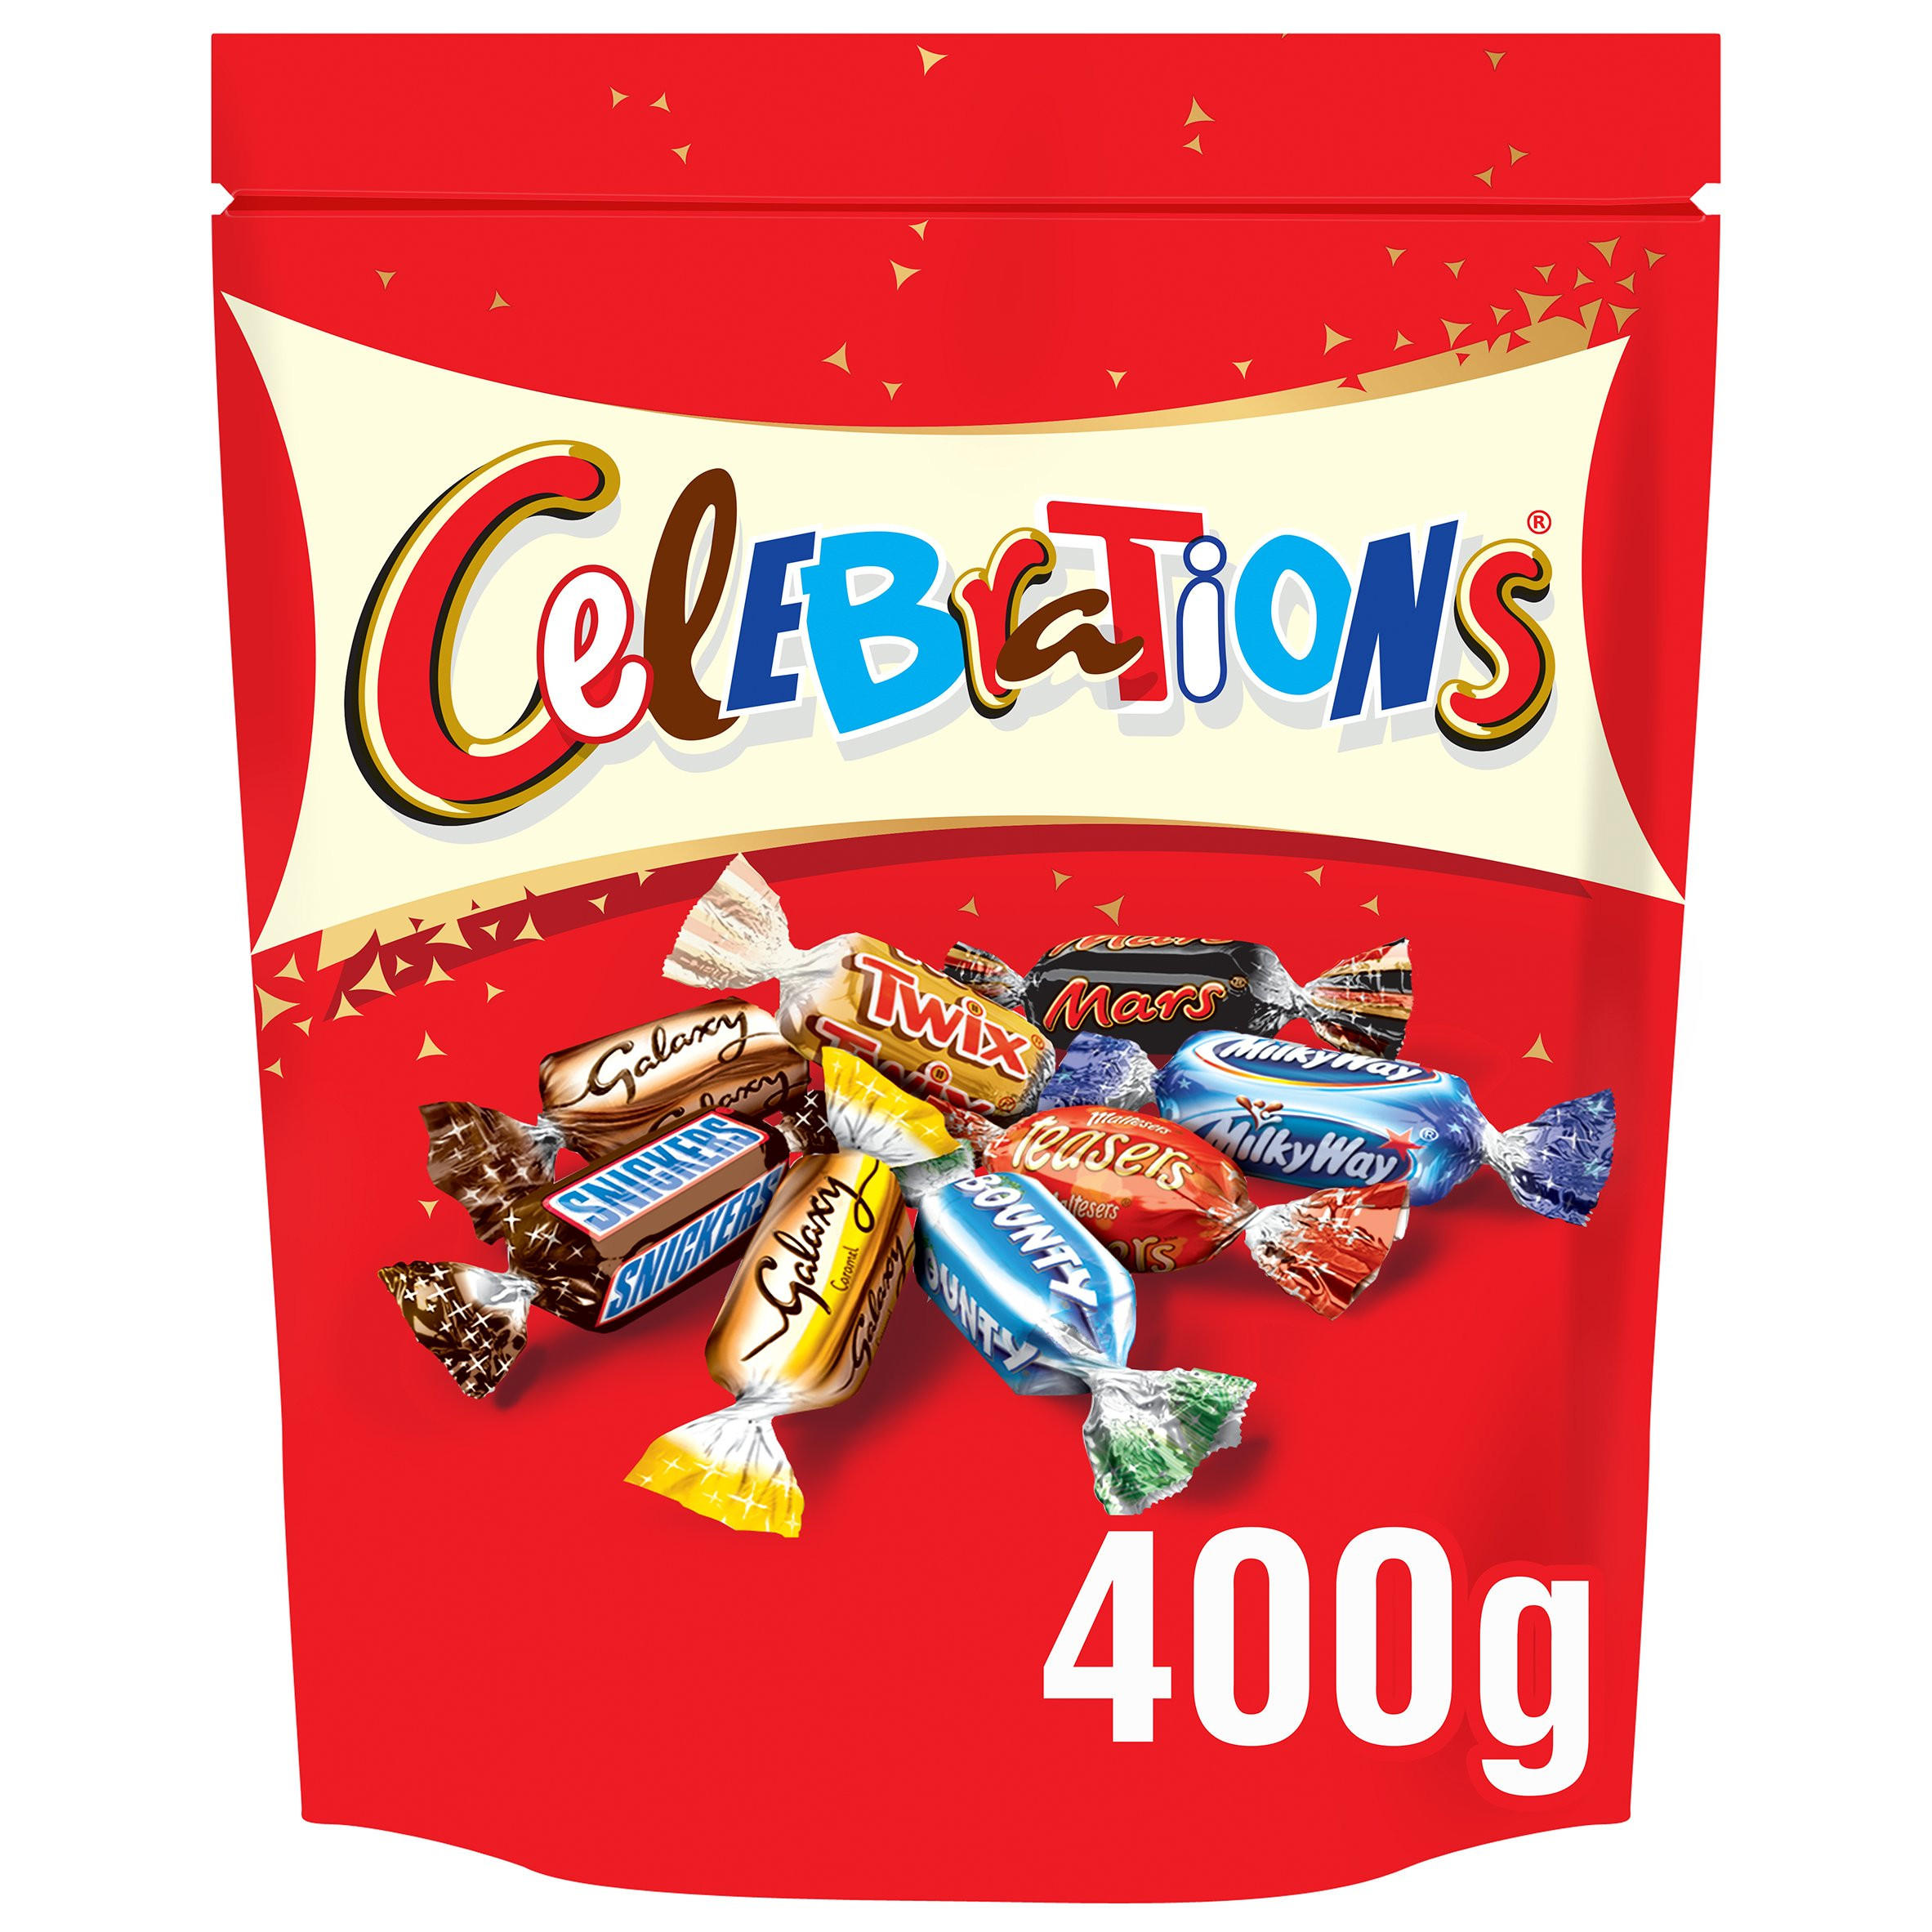 Celebrations Chocolate Sharing Pouch Bag 400g | Sharing Bags & Tubs | Iceland Foods